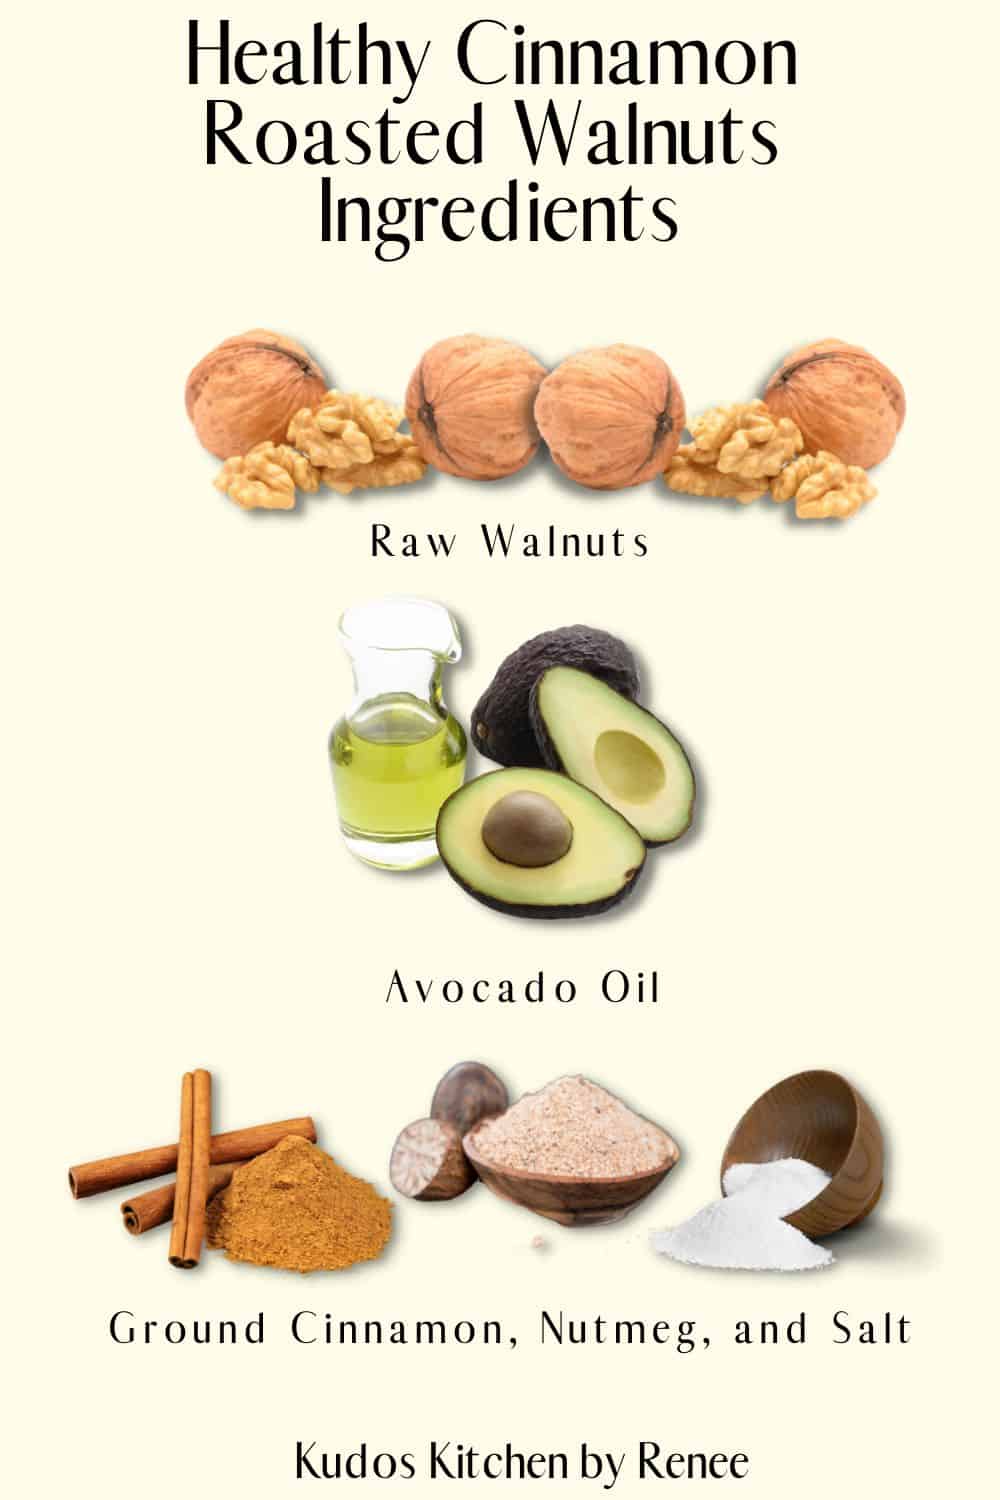 A visual ingredient list for making Healthy Cinnamon Roasted Walnuts.